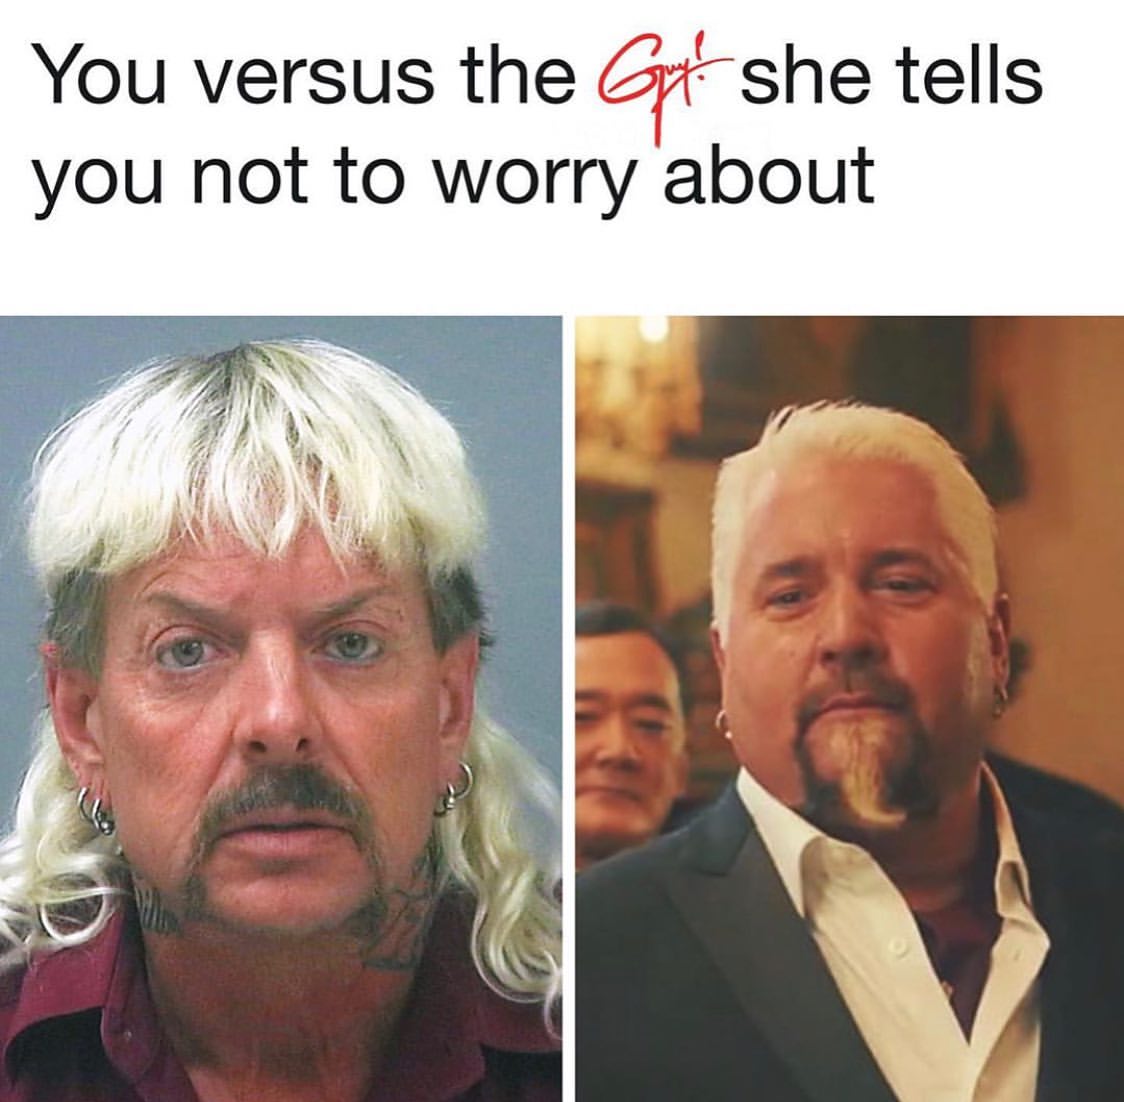 You versus the guy she tell you not to worry about.